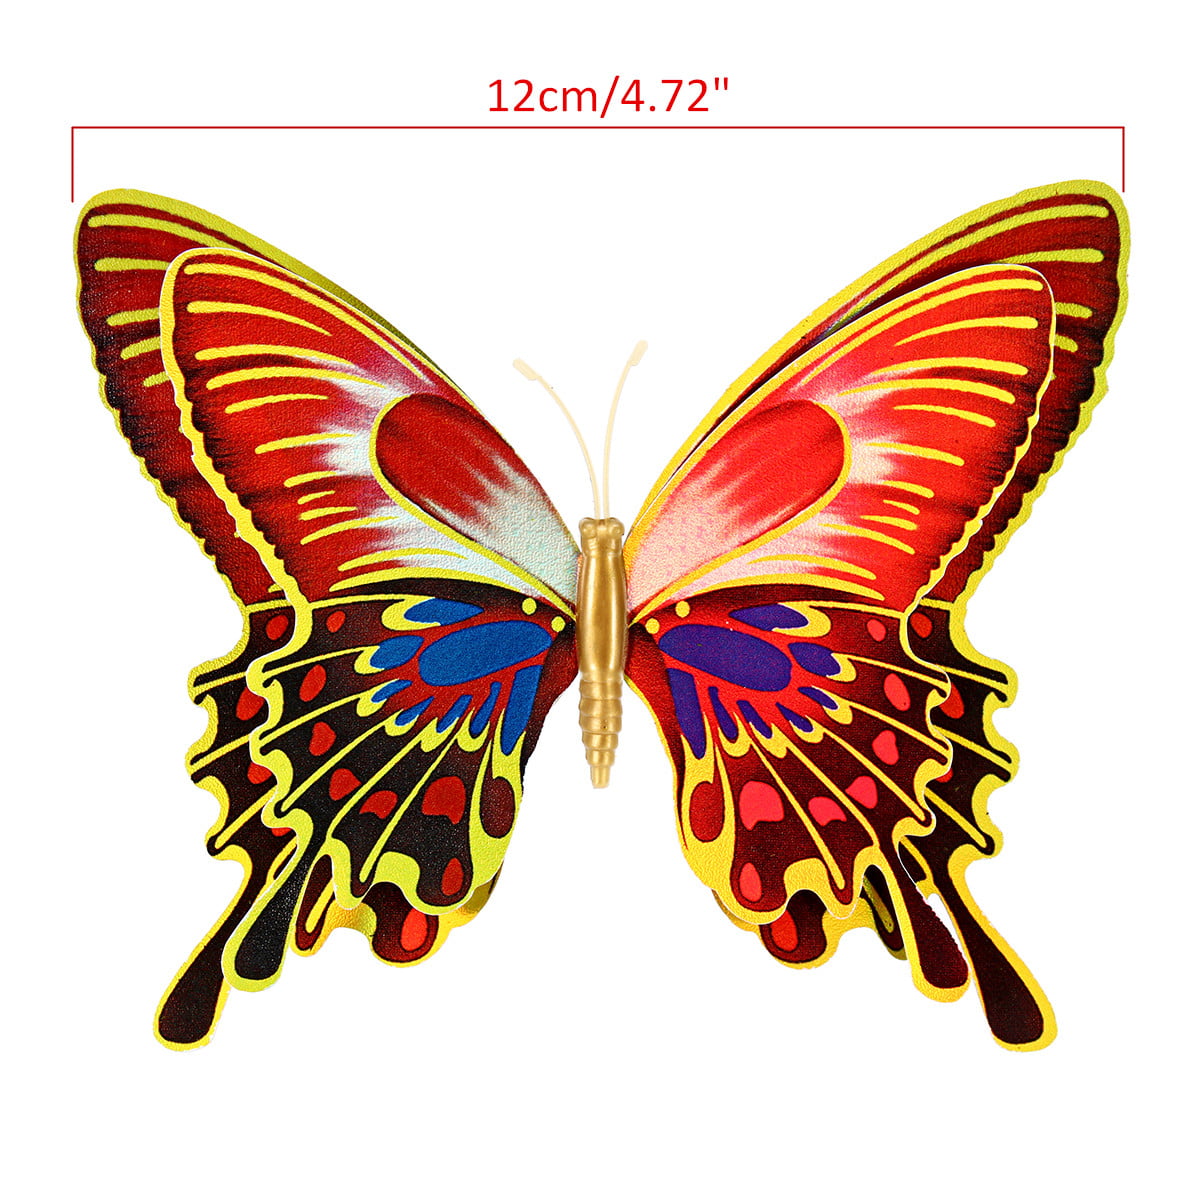 12 pcs 3D Butterfly Wall Stickers Art Decal Home Room Decorations Decor Kids 